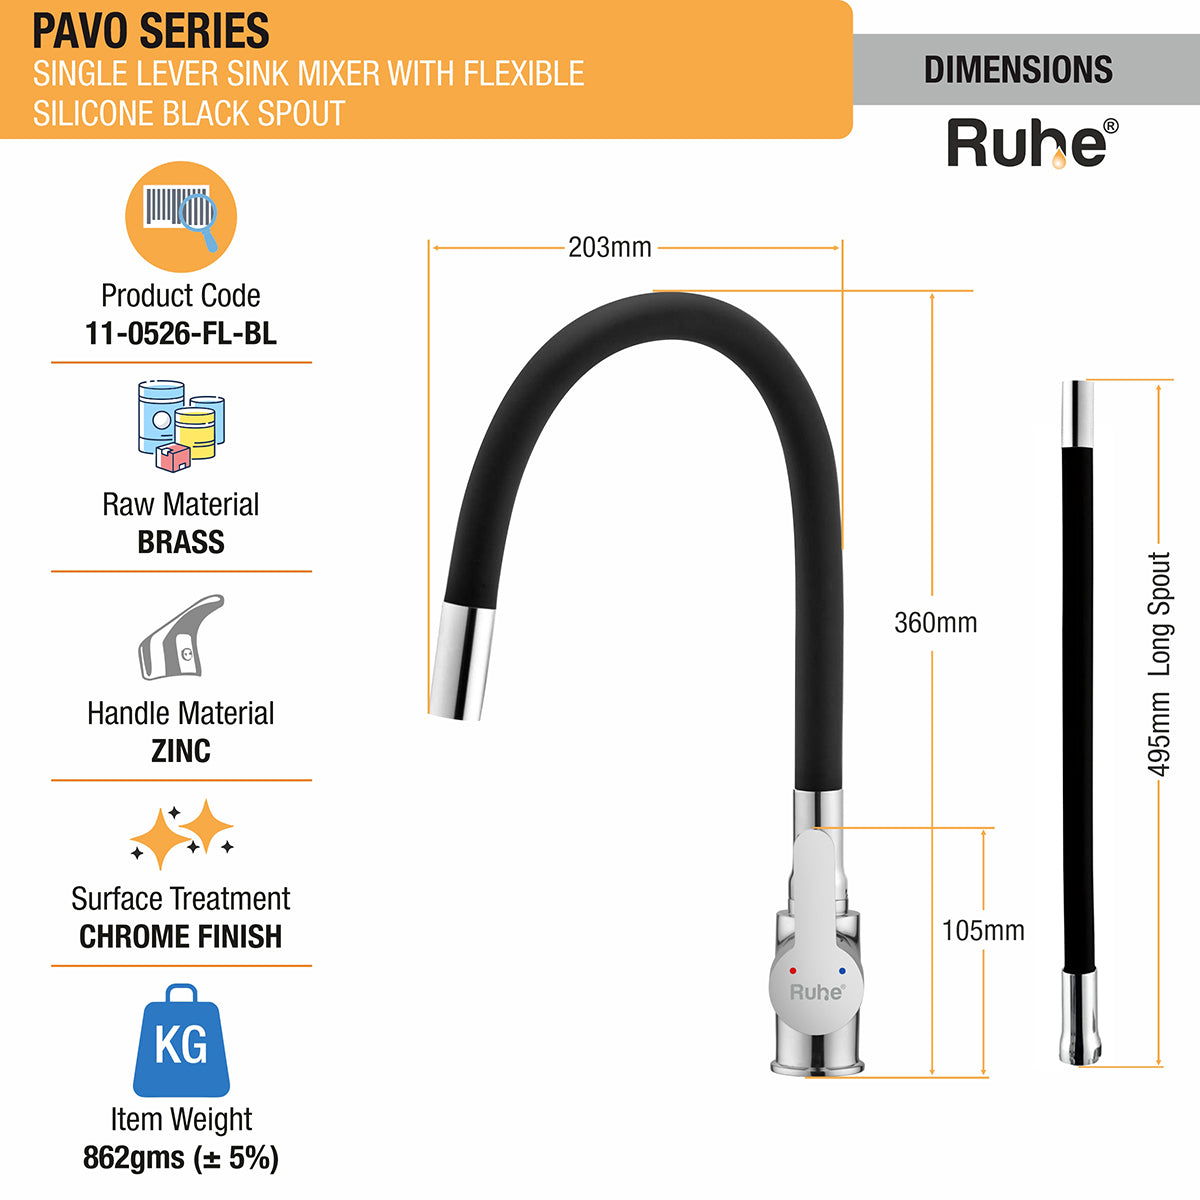 Pavo Single Lever Sink Mixer with Silicone Black Flexible Spout dimensions and sizes